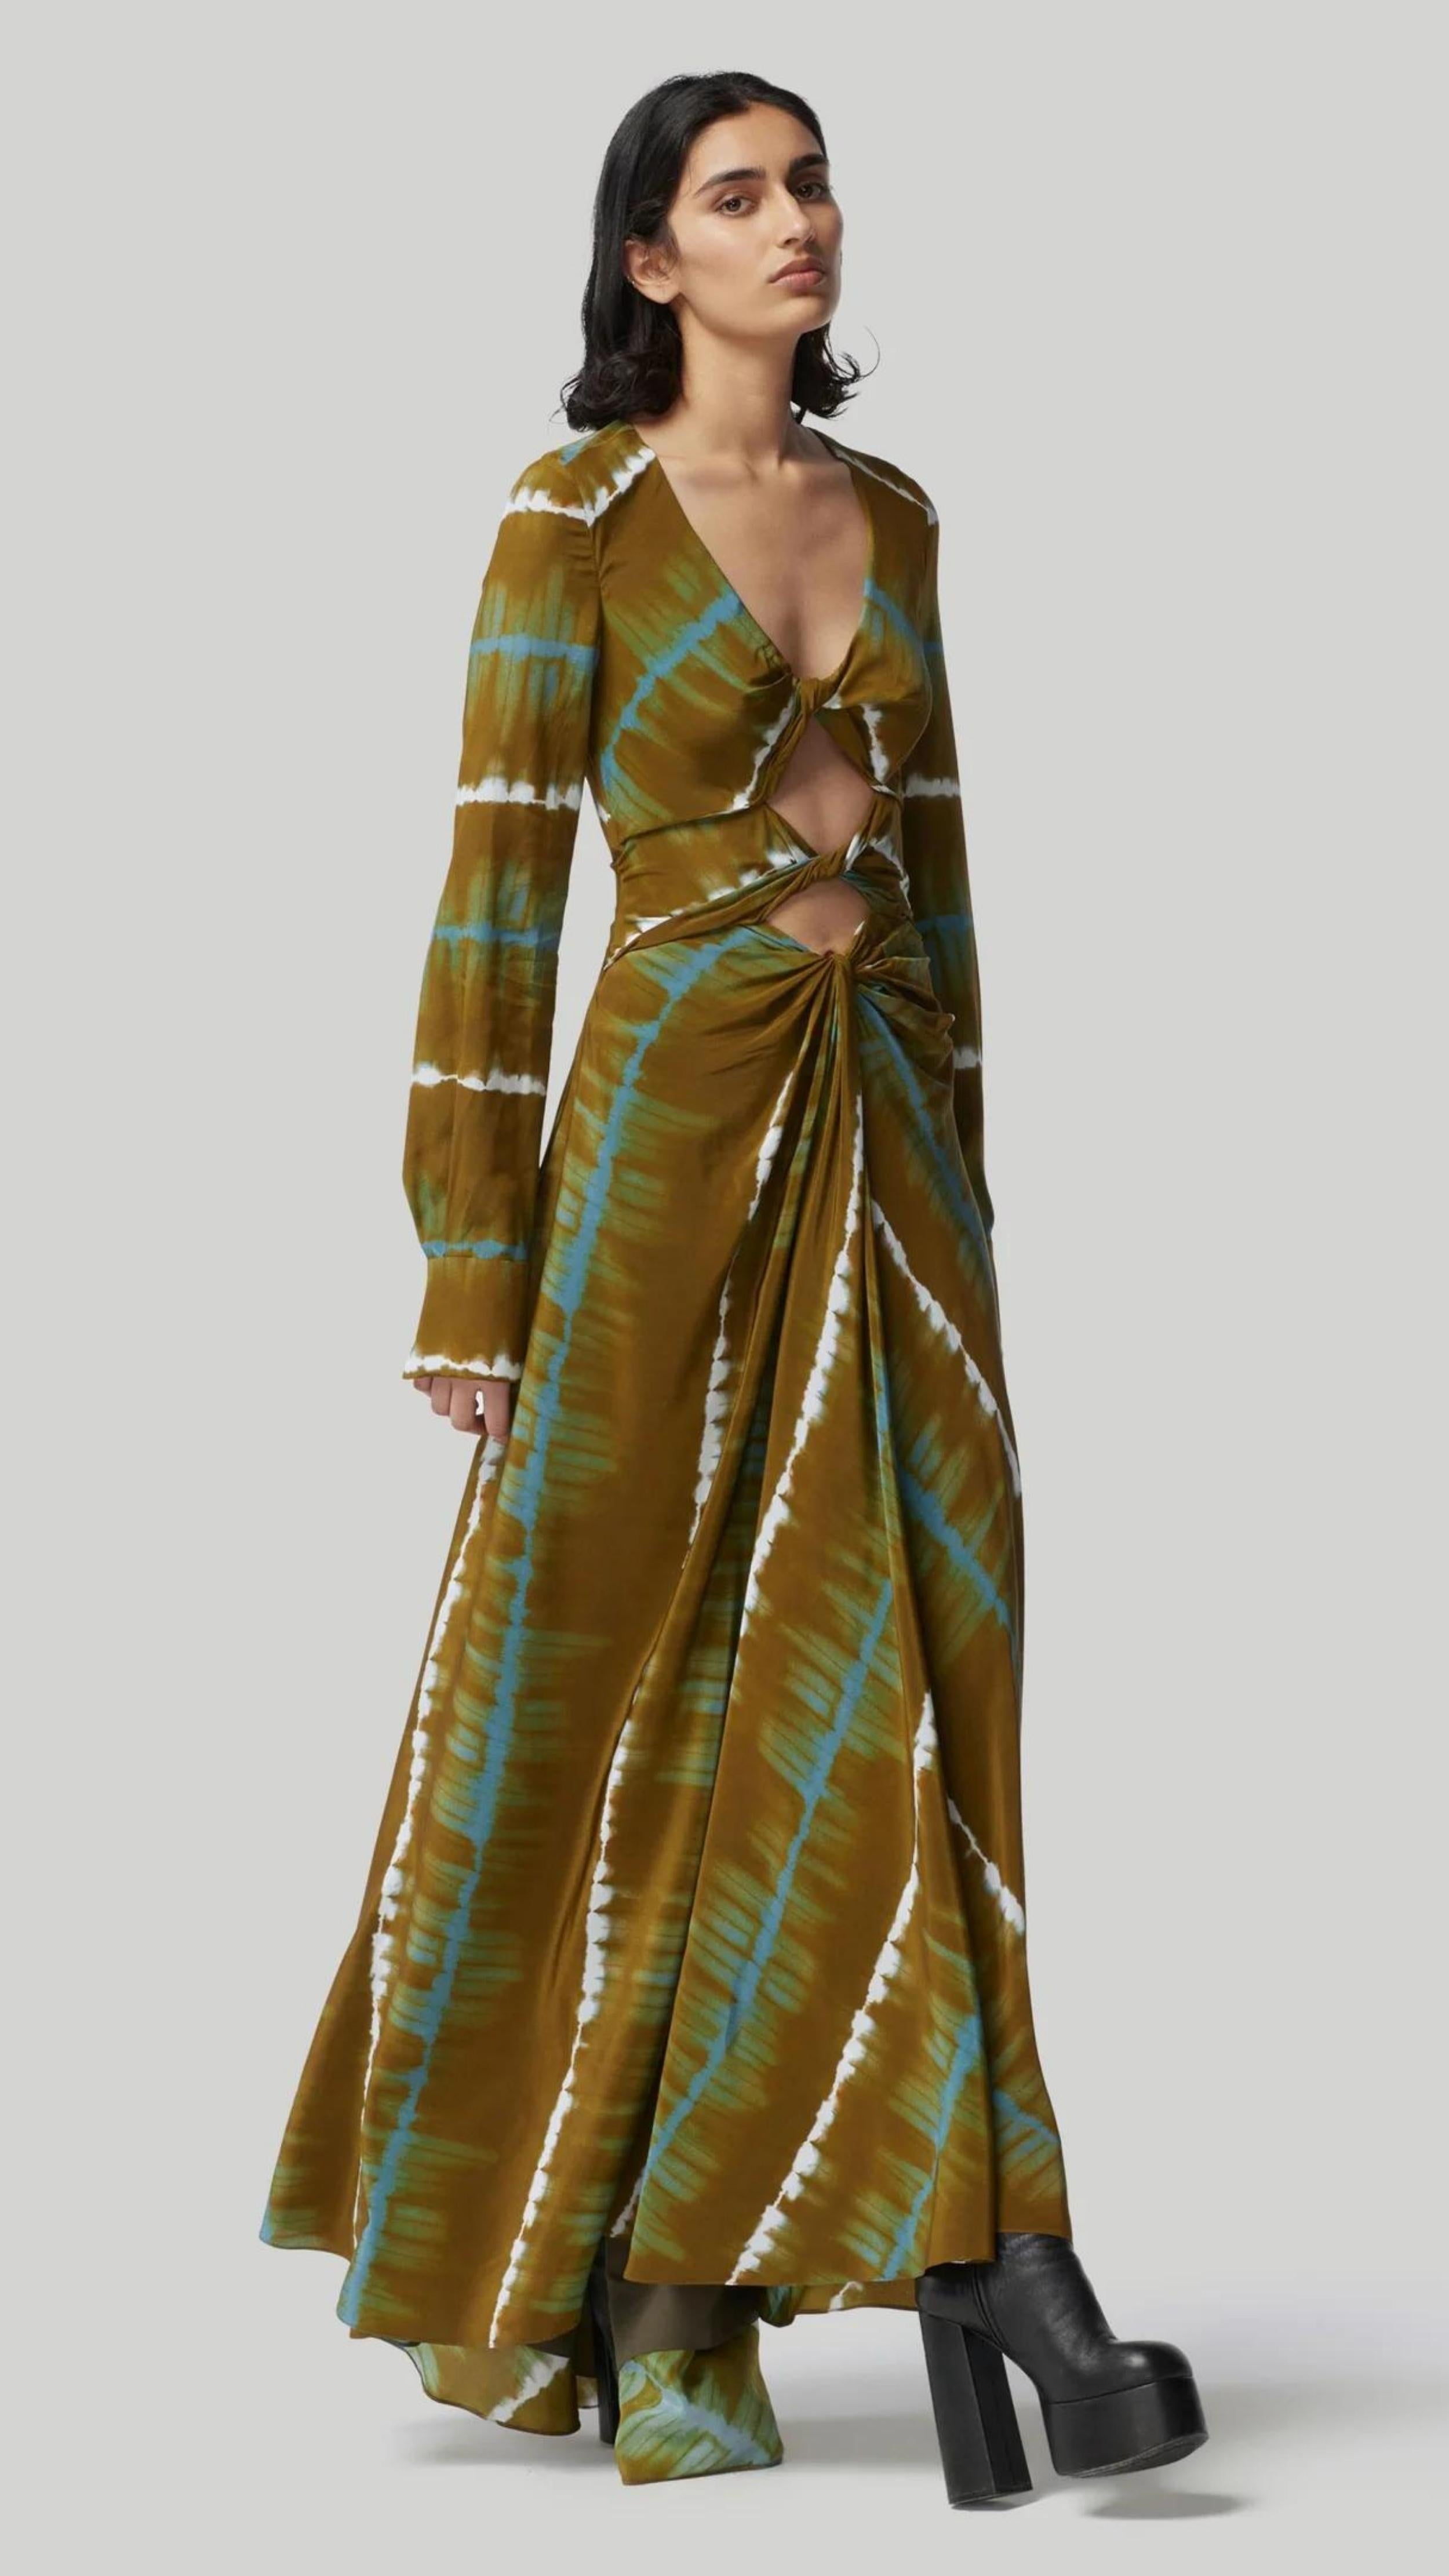 Altruzarra, Helenos Dress. 100% silk and shibori dyed in beautiful olive green and ecru pattern with a highlight pop of blue/green. It features a v neckline, long sleeves and a full skirt with front cut out and twist details. This pre-fall 2023 dress is shown on a model facing to the front and side. Available at experience 27 in madrid, spain.